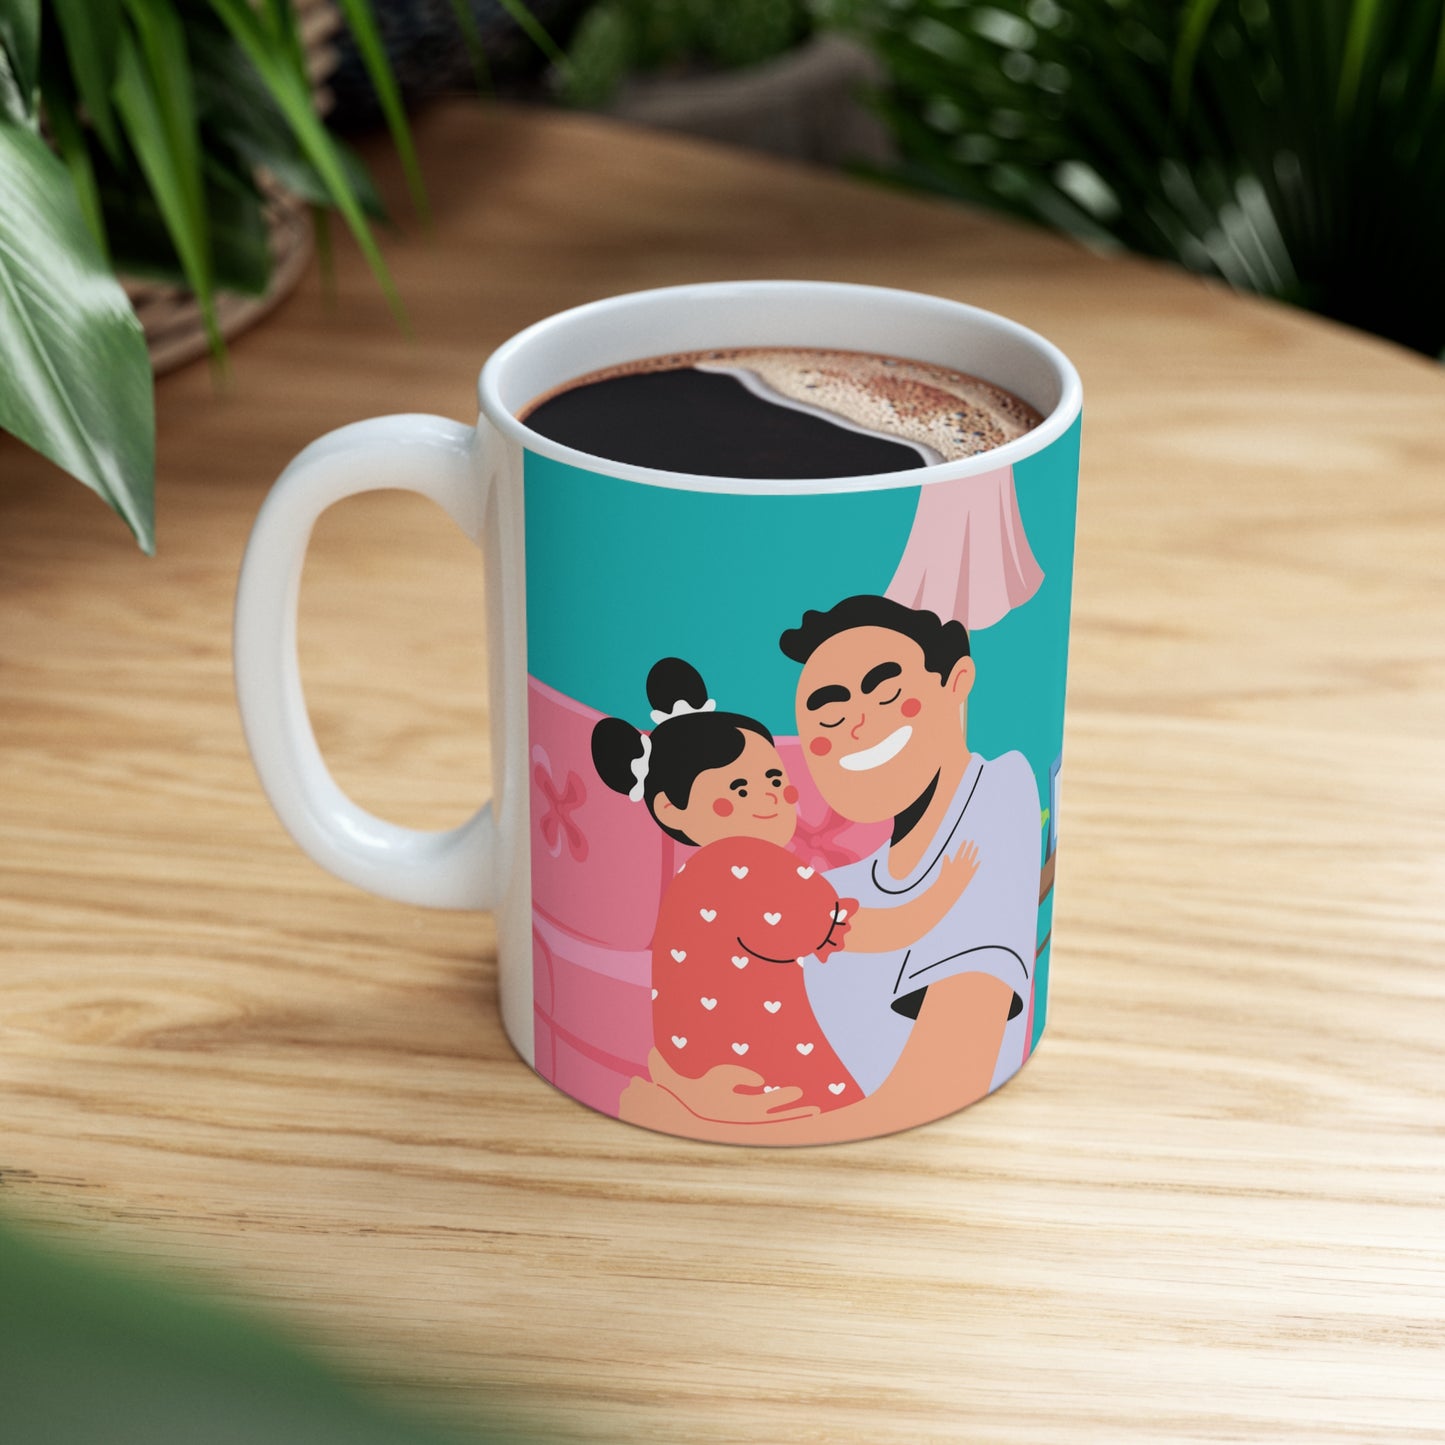 “YOU ARE MY HERO, DAD” on one side and a happy time shared by dad and daughter. Part of several mugs to choose from depending on what resonates with you.